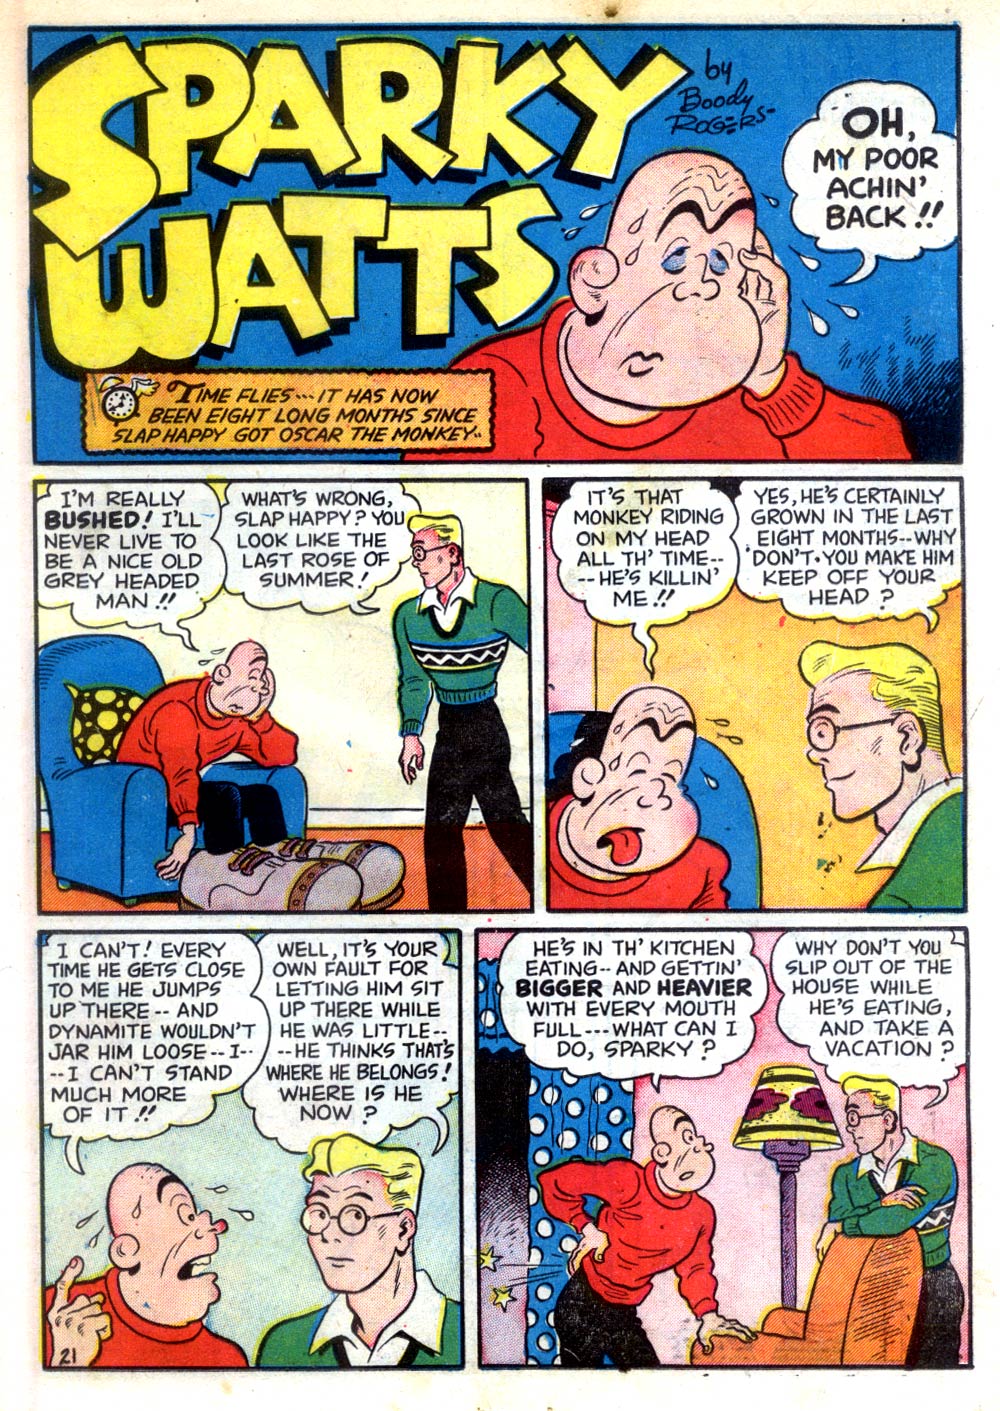 Read online Sparky Watts comic -  Issue #8 - 23